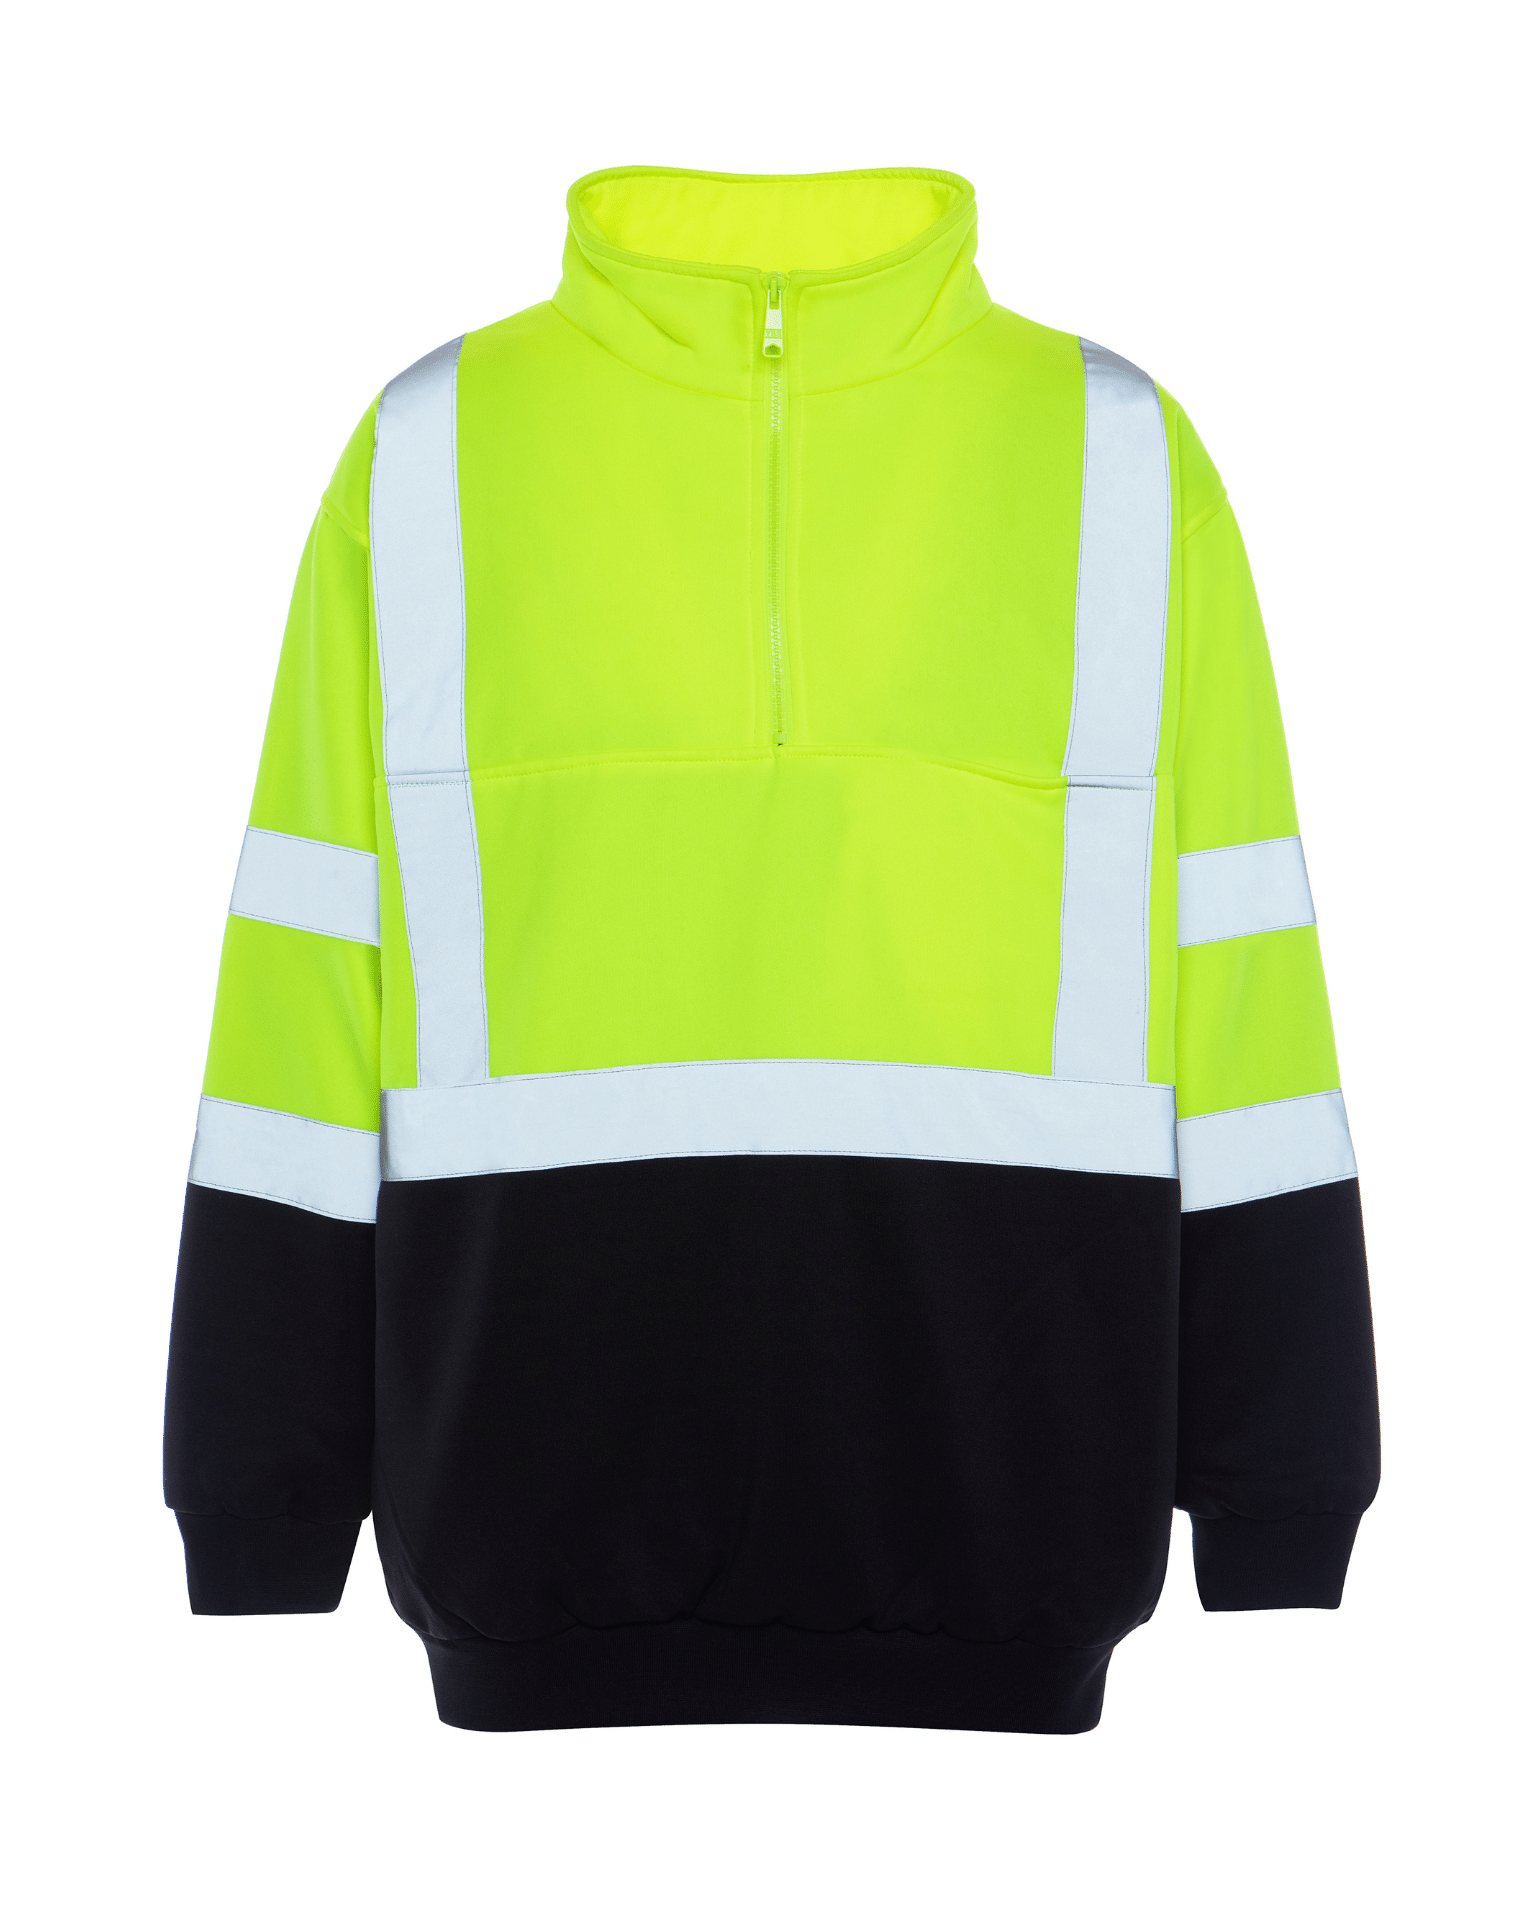 ANSI Class 3 High Visibility teflon fabric protector 1/4 zip softshell pullover by Utility Pro